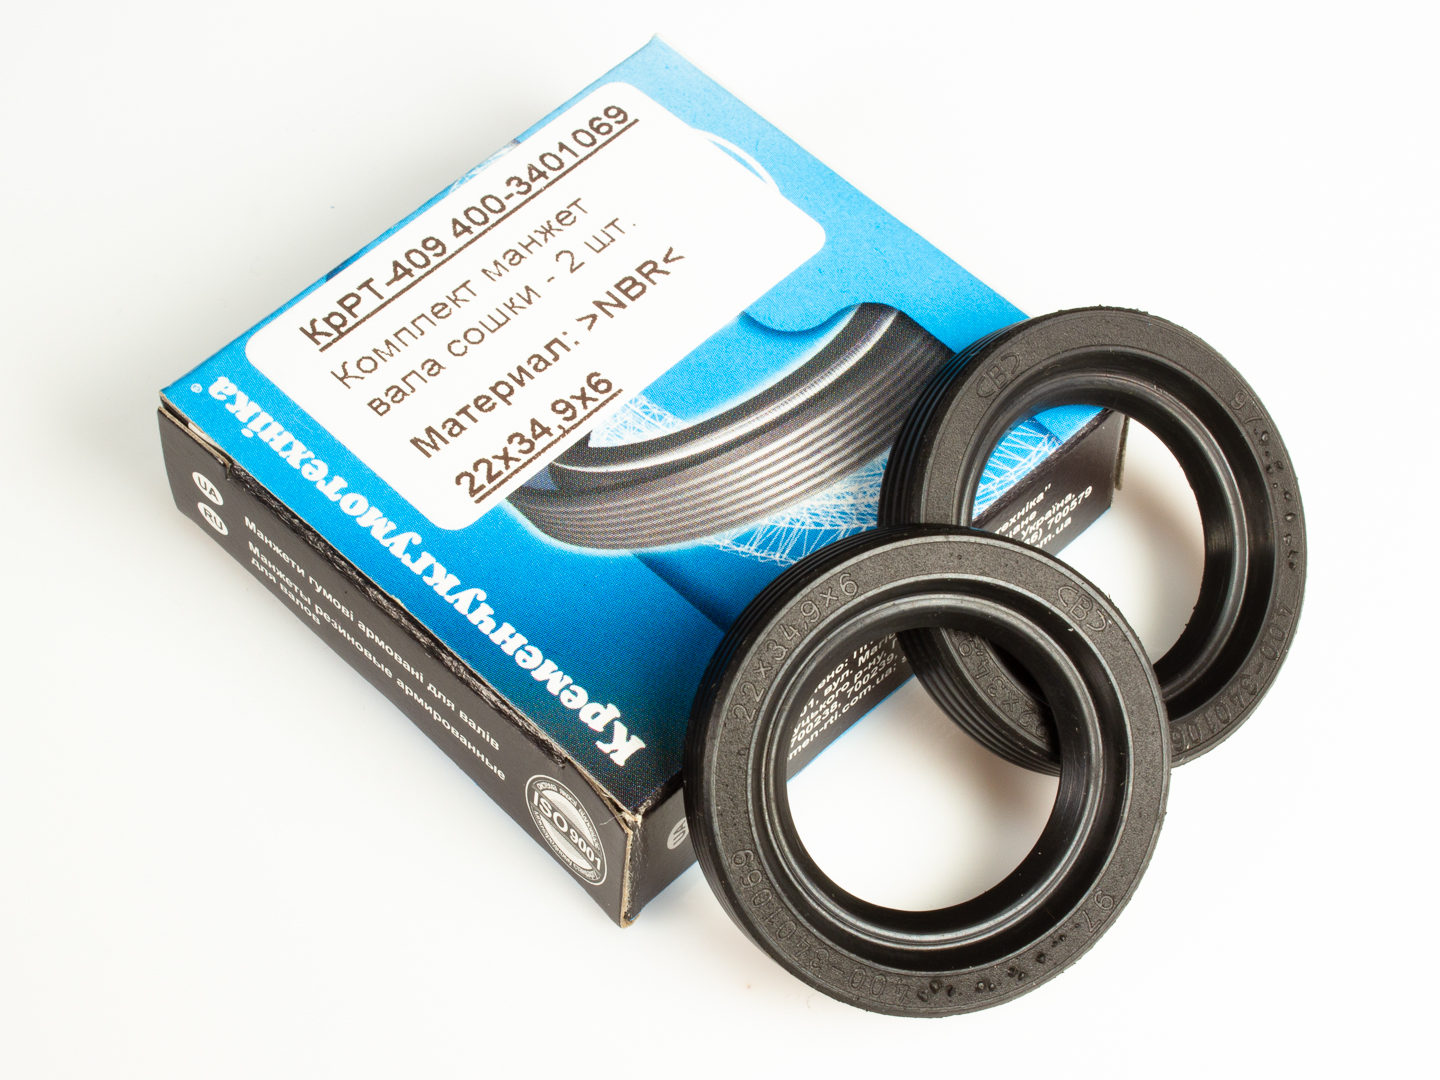 Rotary shaft oil seal 32 x 42 x pack height, model 